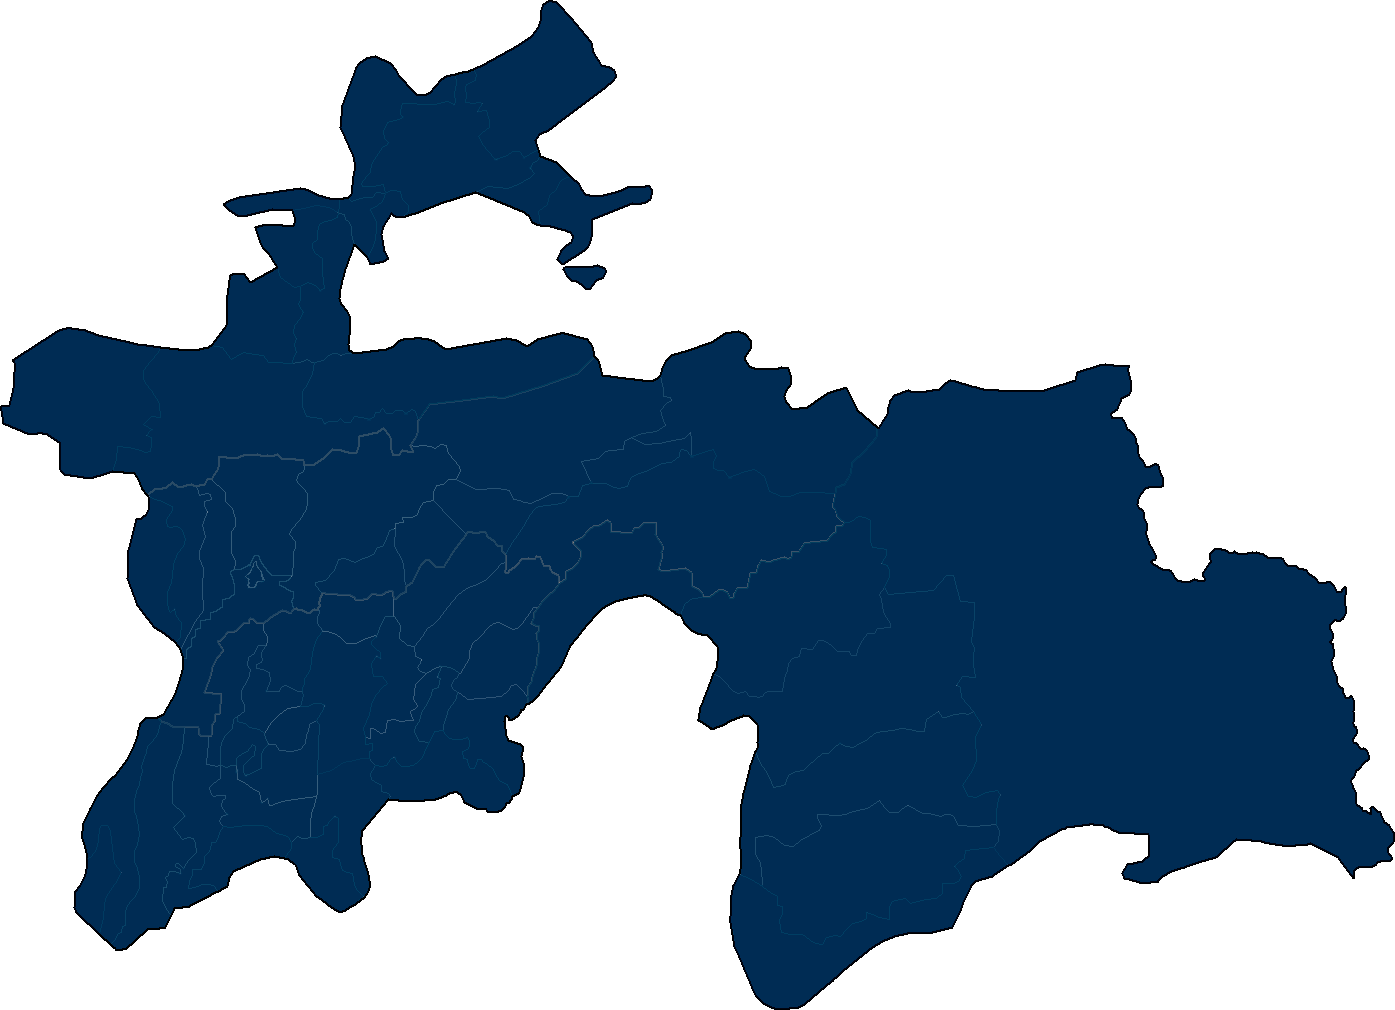 Information about the regions